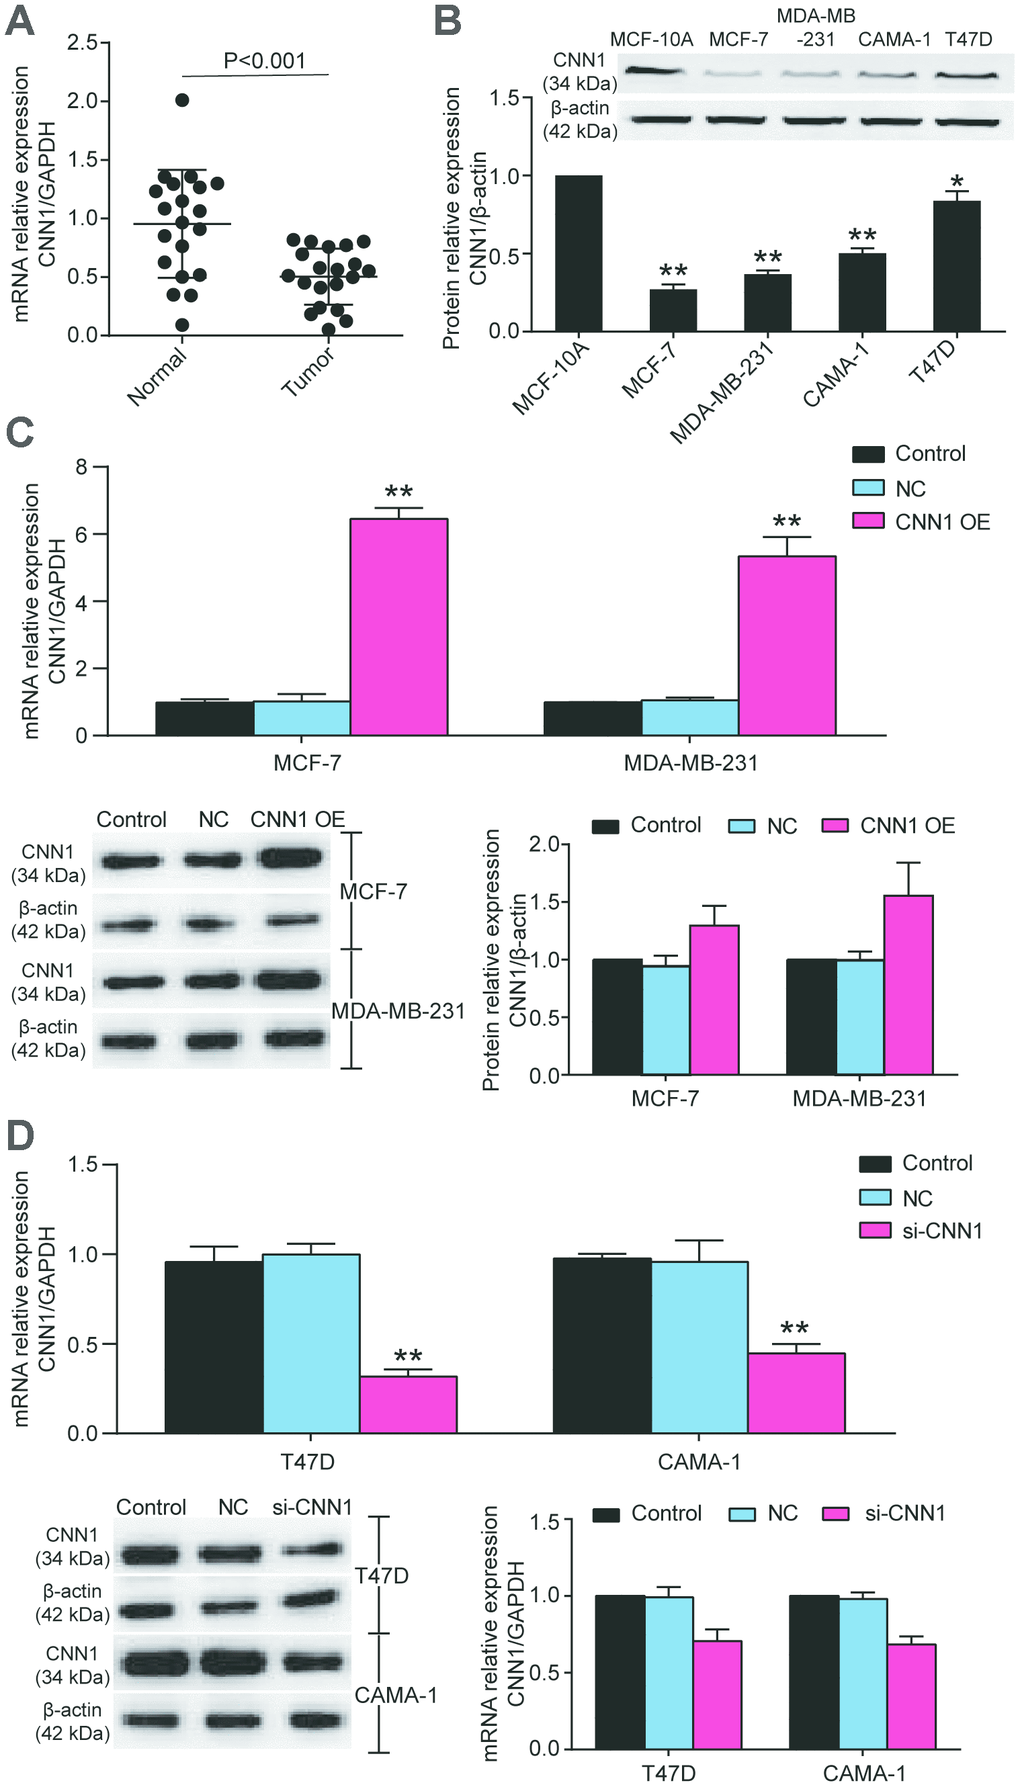 The CNN1 expression was decreased in BRCA tissues and cells. (A) The downregulation of CNN1 in breast cancer tissues (n=20) compared with normal breast tissues (n=20). (B) The protein expression of CNN1 was decreased in BRCA cell lines compared with the healthy breast cell line. *PC) The CNN1 expression was upregulated after CNN1 overexpression transfected MCF-7 and MDA-MB-231 cells. Control, the cells were cultured without any treatment. NC, the cells were treated with the negative control. CNN1 OE, the cells were treated with CNN1 overexpression. *PD) The CNN1 expression was downregulated after CNN1 small interfering RNA (siRNA) transfected T47D and CAMA-1 cells. Control, the cells were cultured without any treatment. NC, the cells were treated with the negative control. si-CNN1, the cells were transfected with CNN1 siRNA. *P